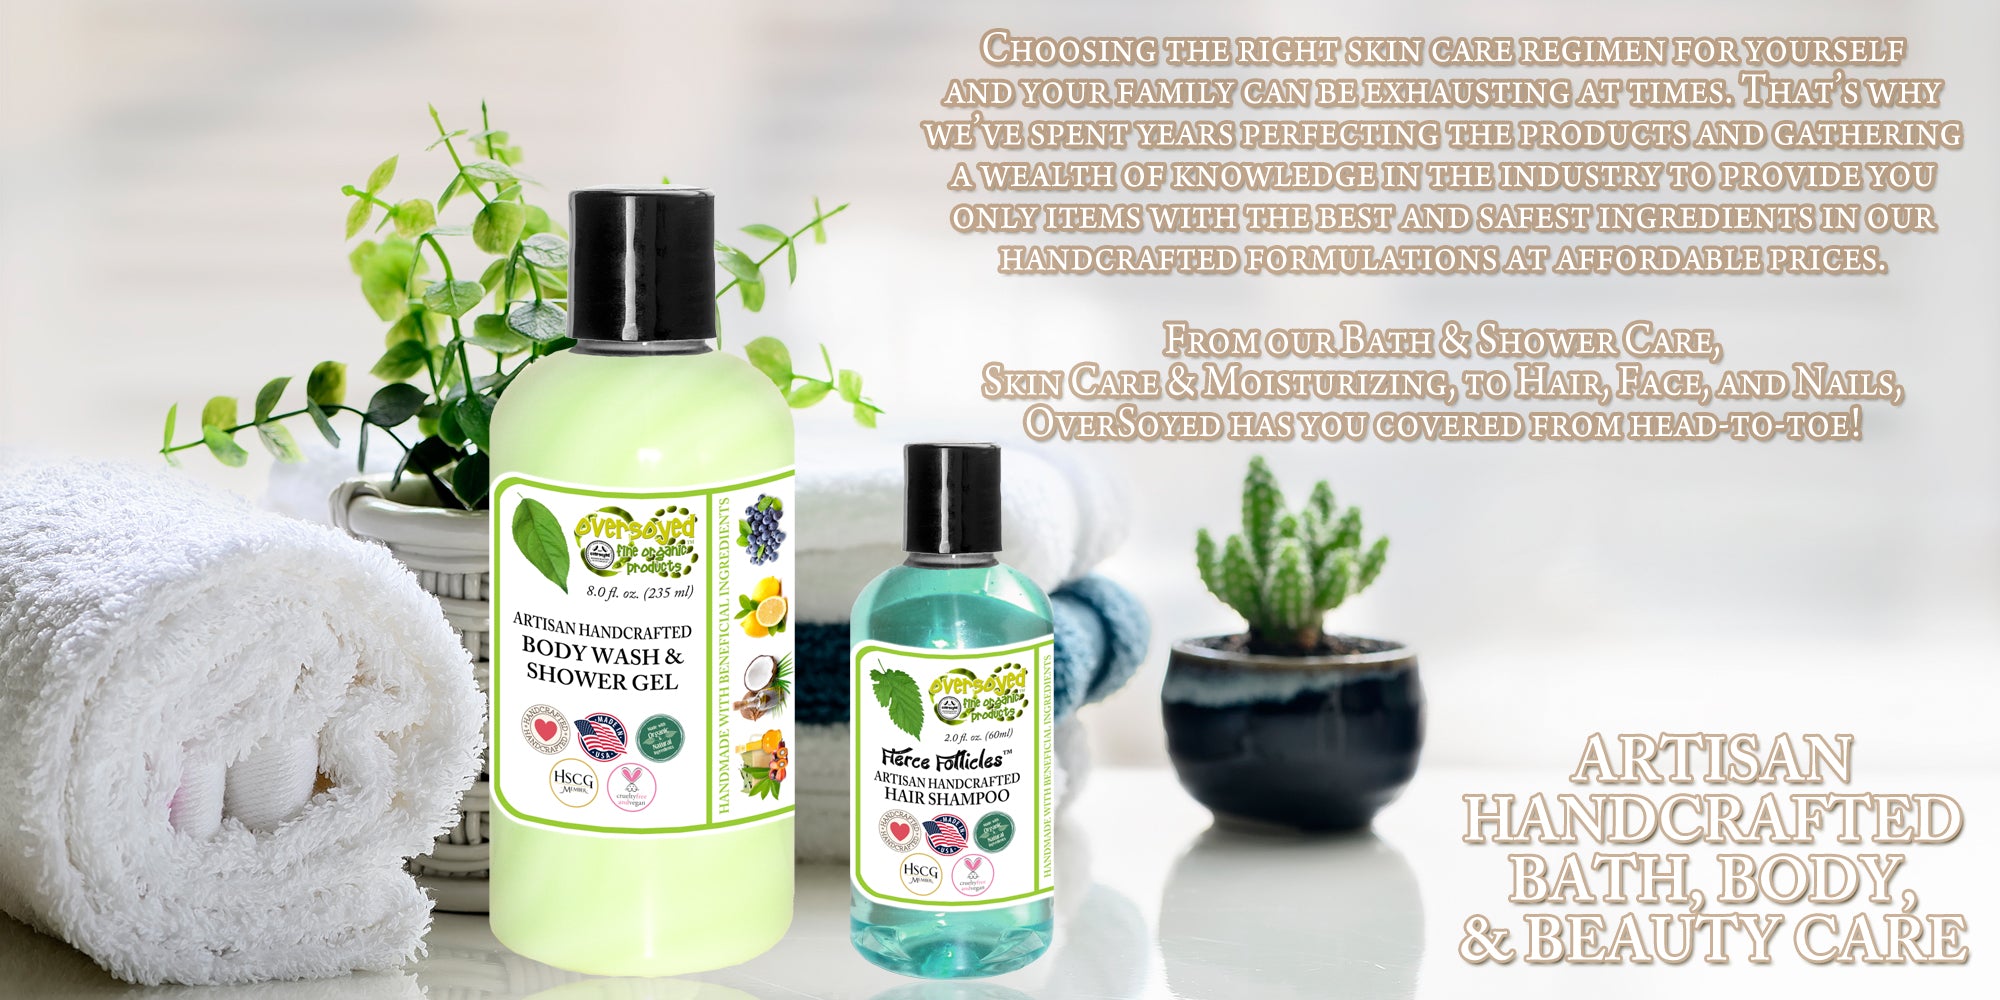 OverSoyed Fine Organic Products - Artisan Handcrafted Bath, Body, and Beauty Care